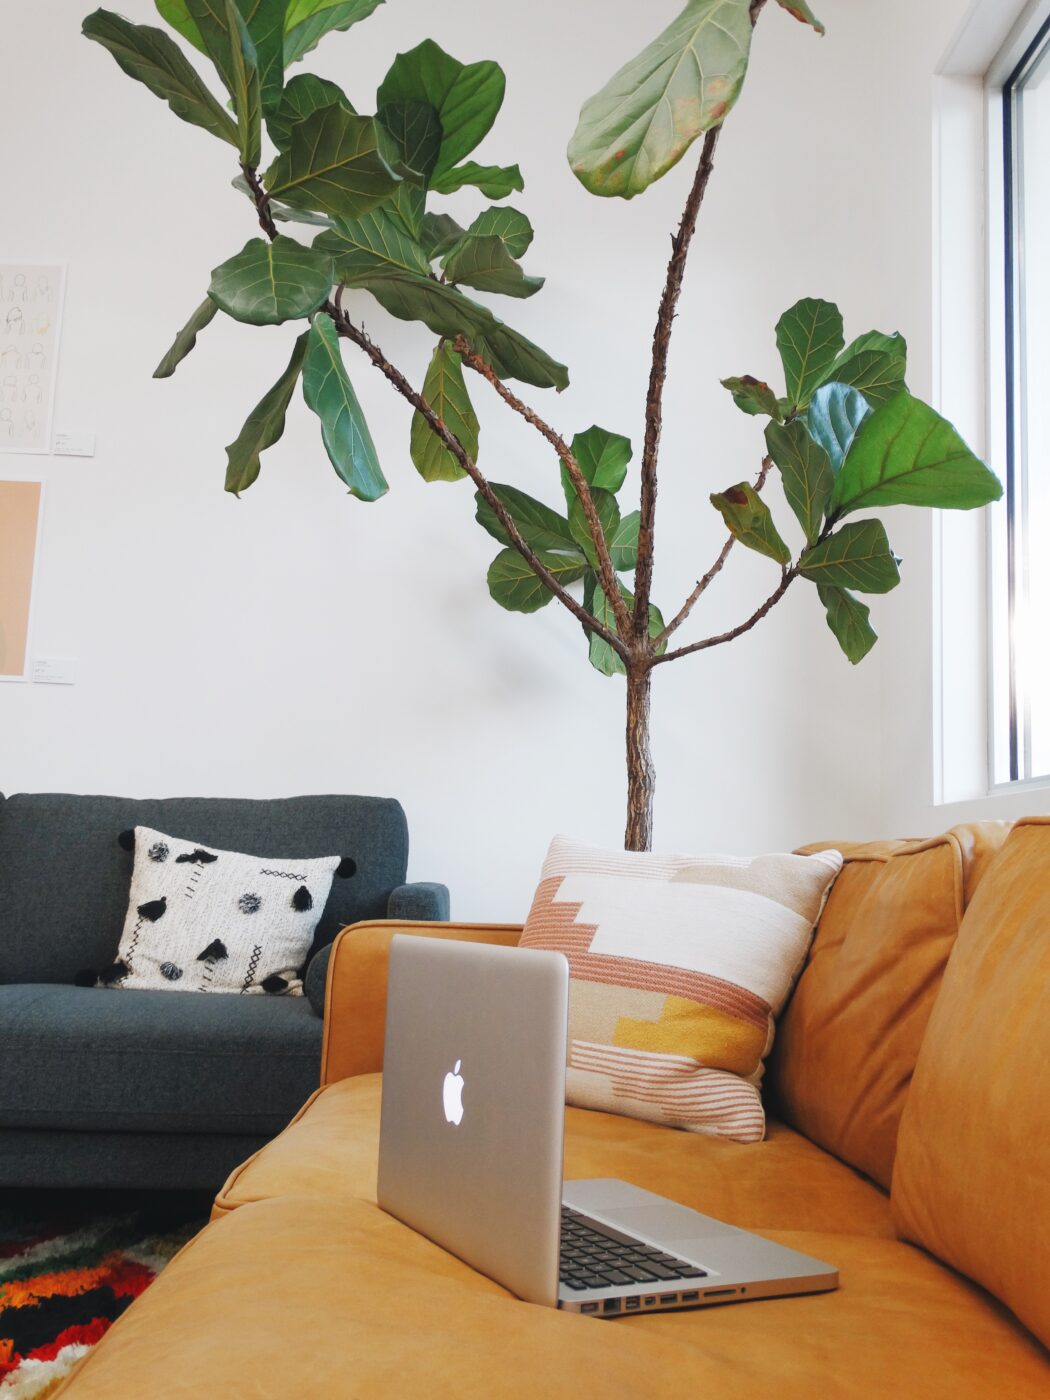 MacBook sitting on orange couch with green plant near